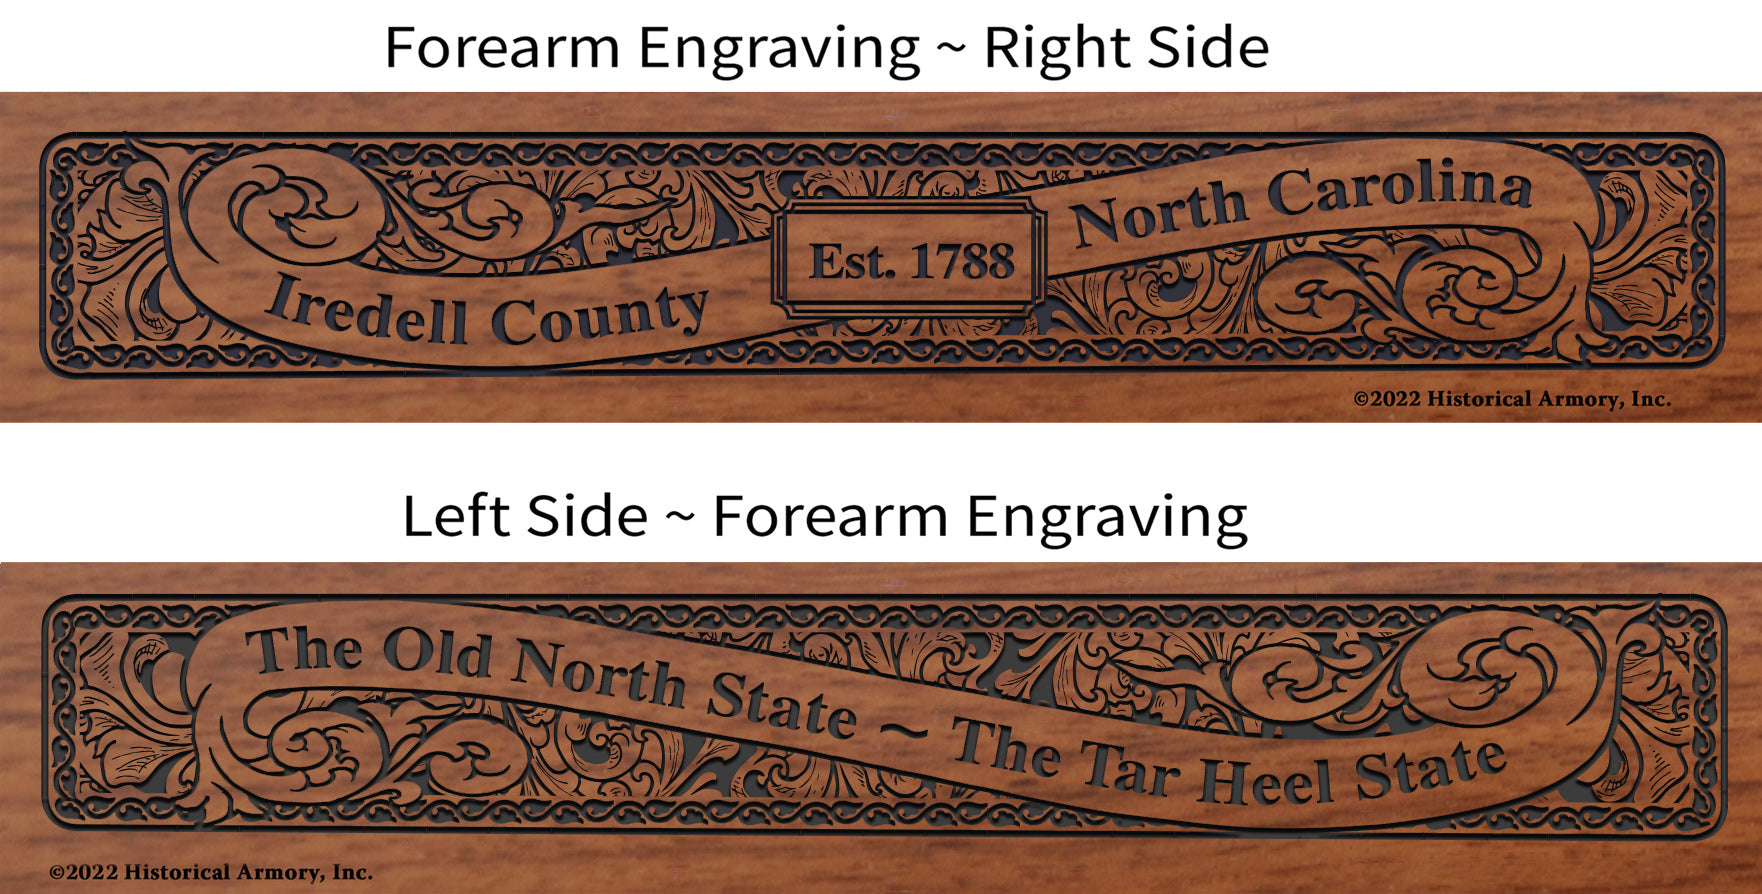 Iredell County North Carolina Engraved Rifle Forearm